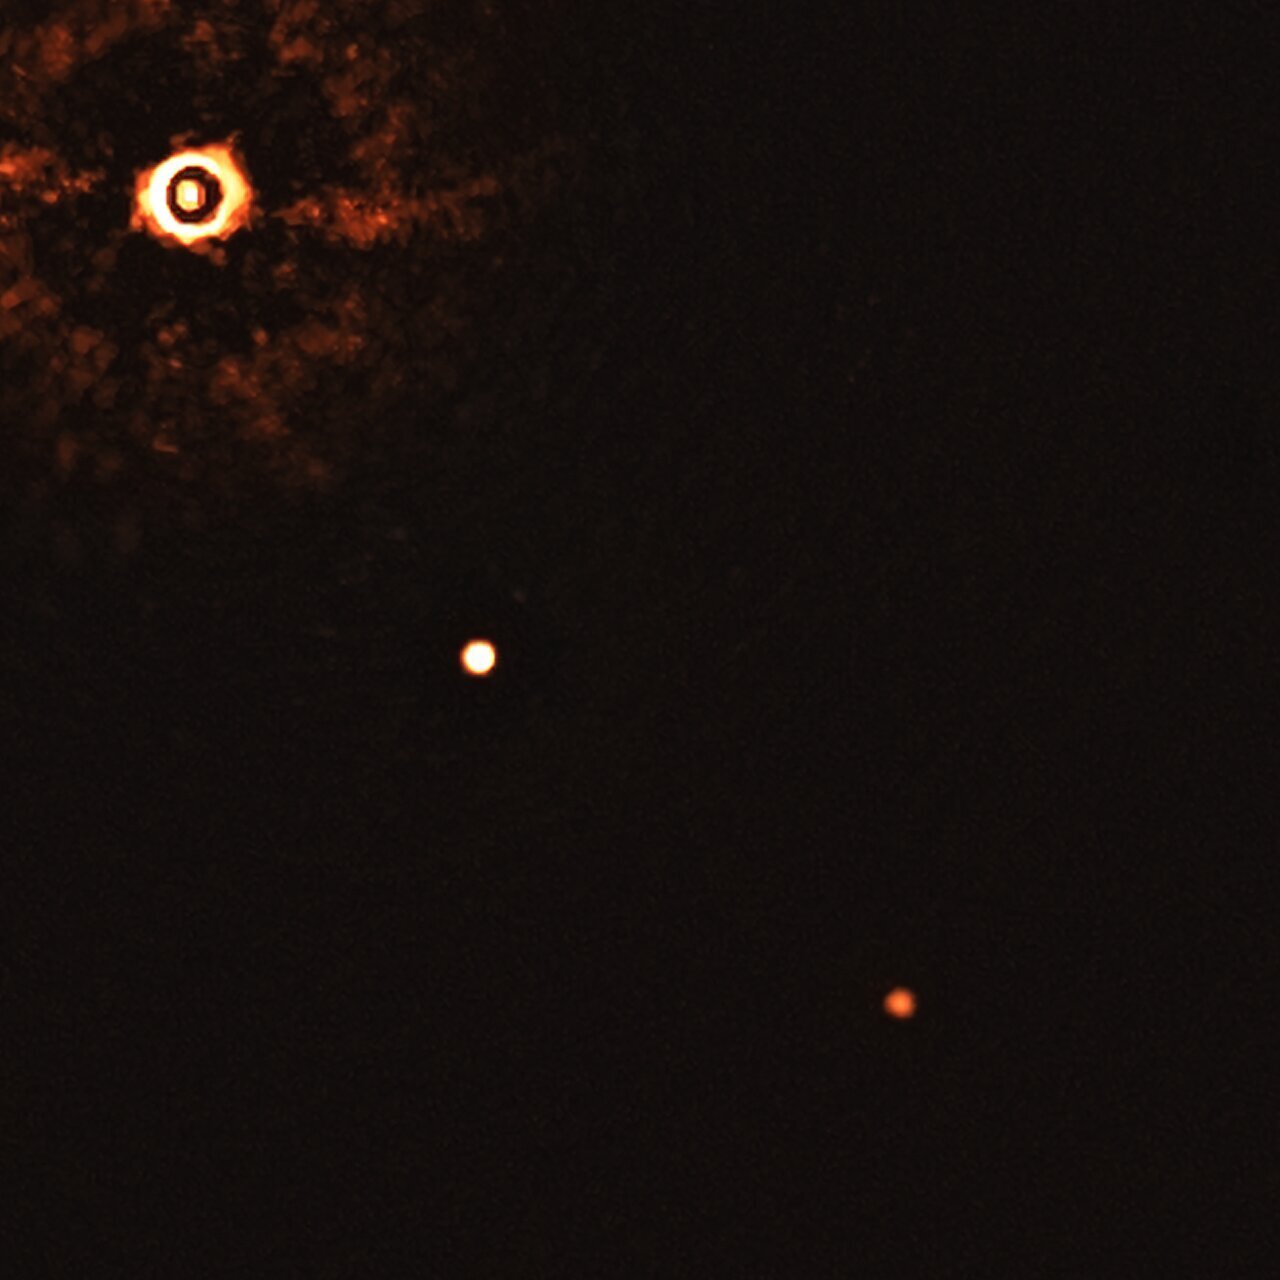 Direct image of two planets around a Sun-like star.